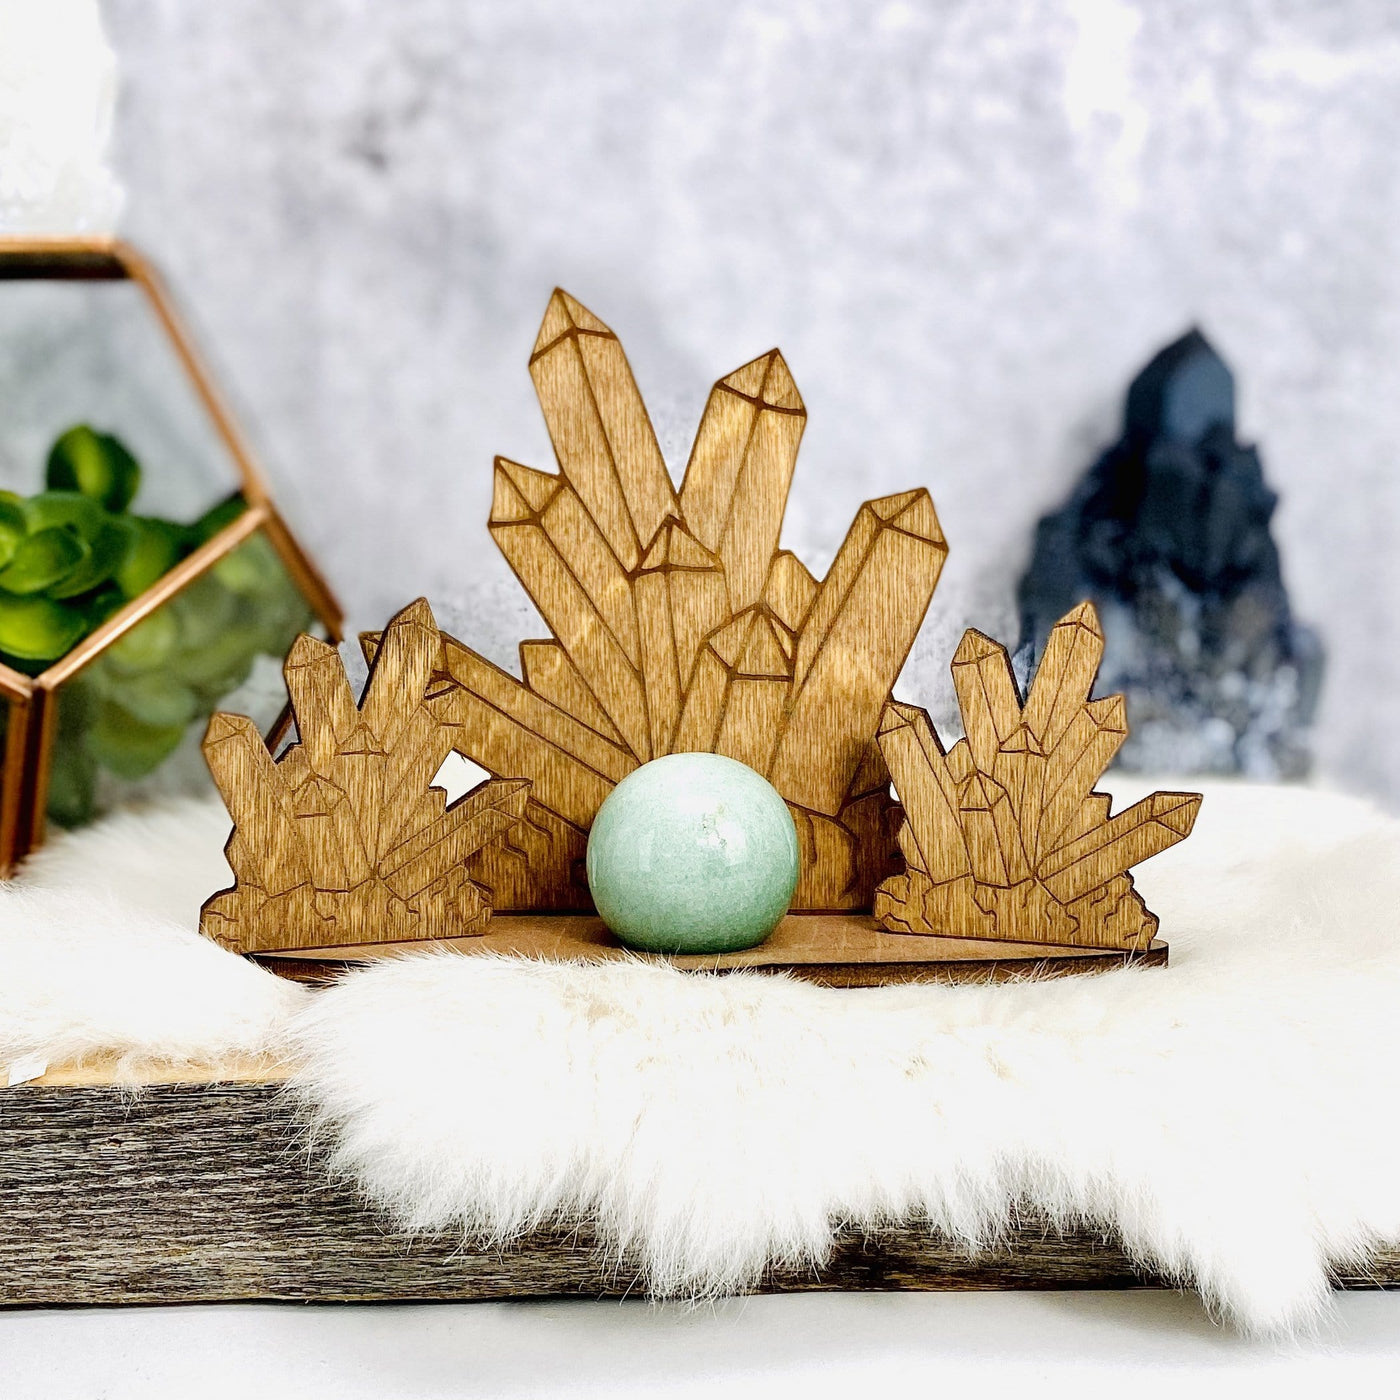 Crystal Point Wooden Sphere Stand-- sphere on wooden stand for size purposes on log.